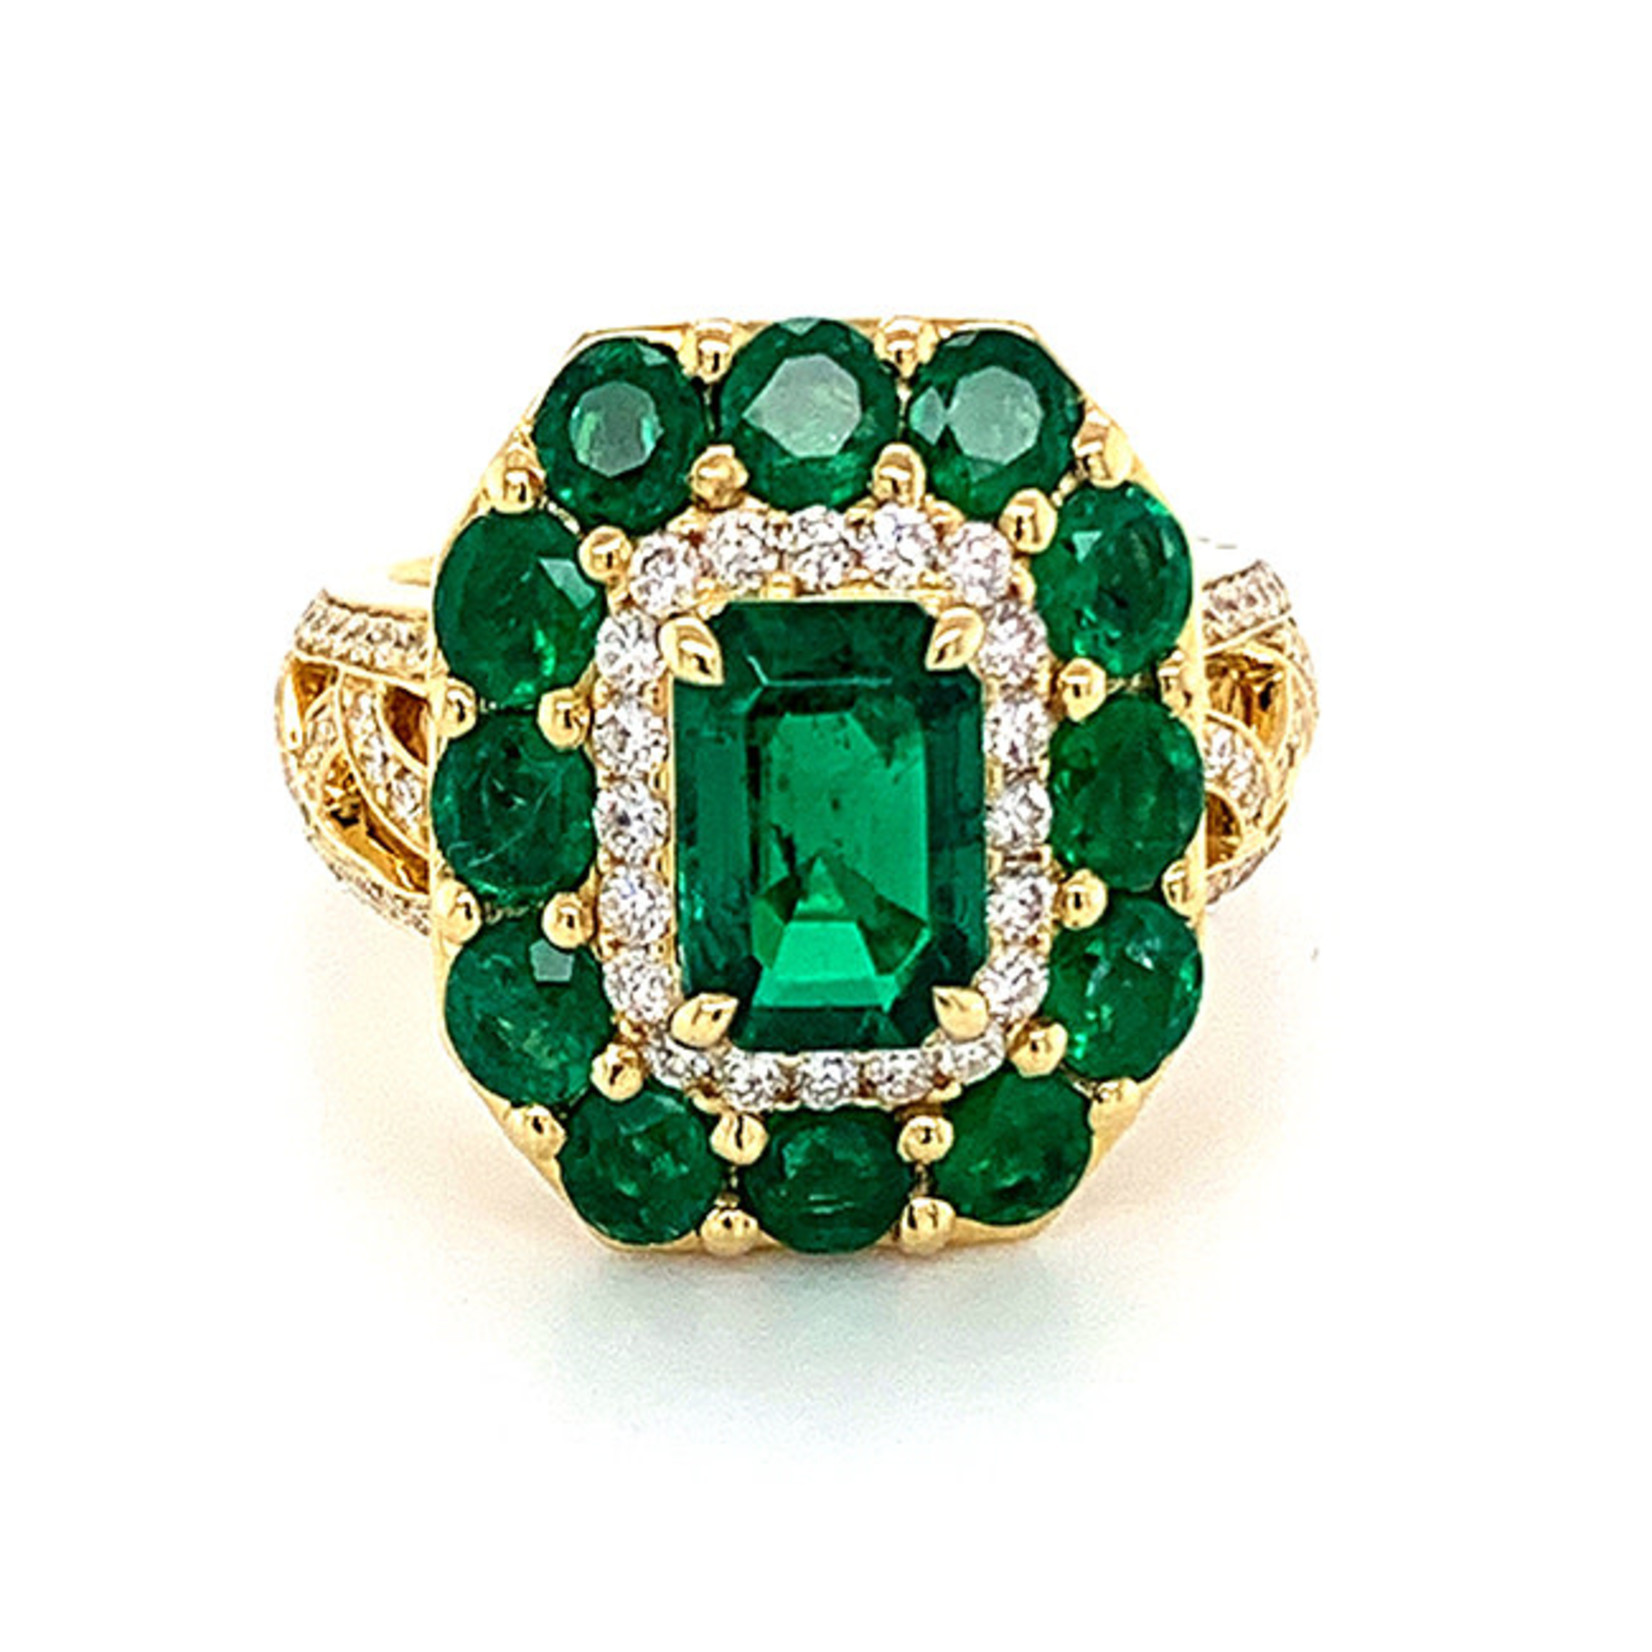 Jewelry By Danuta - Gold Drawer Colombian Emerald & Diamond Gold Ring,1.15 ct Colombian Emerald,1.88ct side E, .62ct Dia